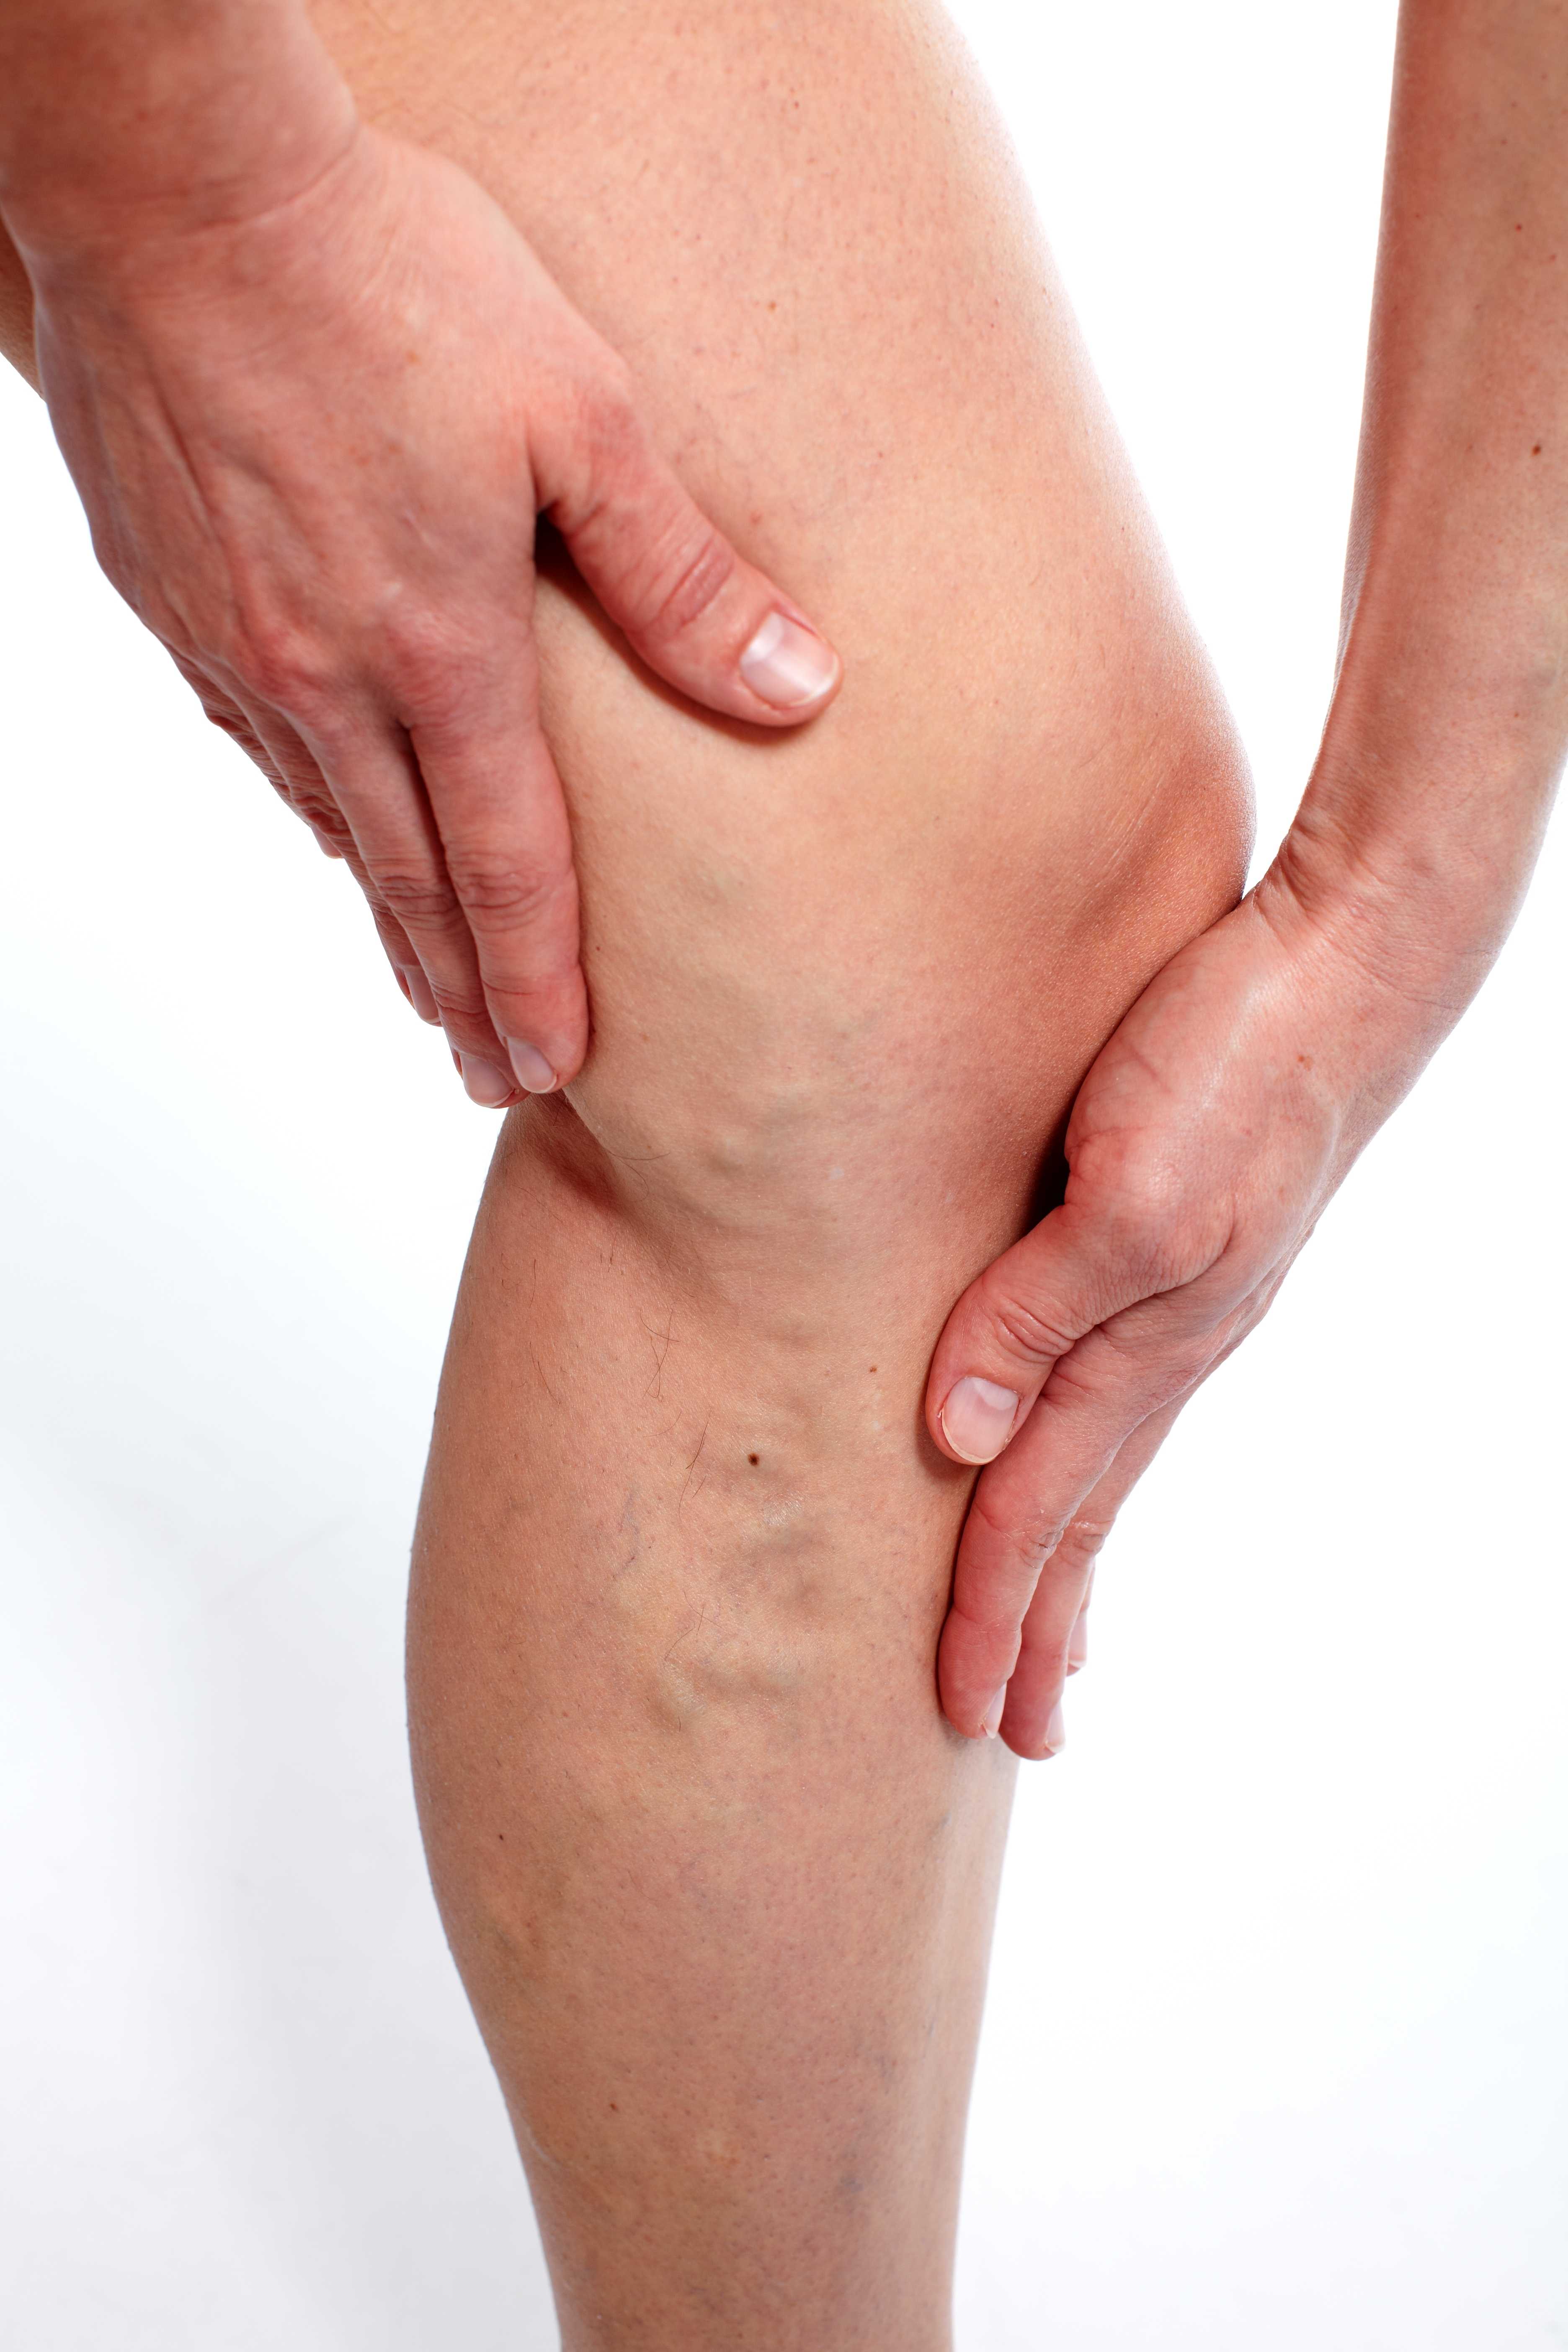 4 Strategies to Prevent Varicose Veins and Have Flawless Legs